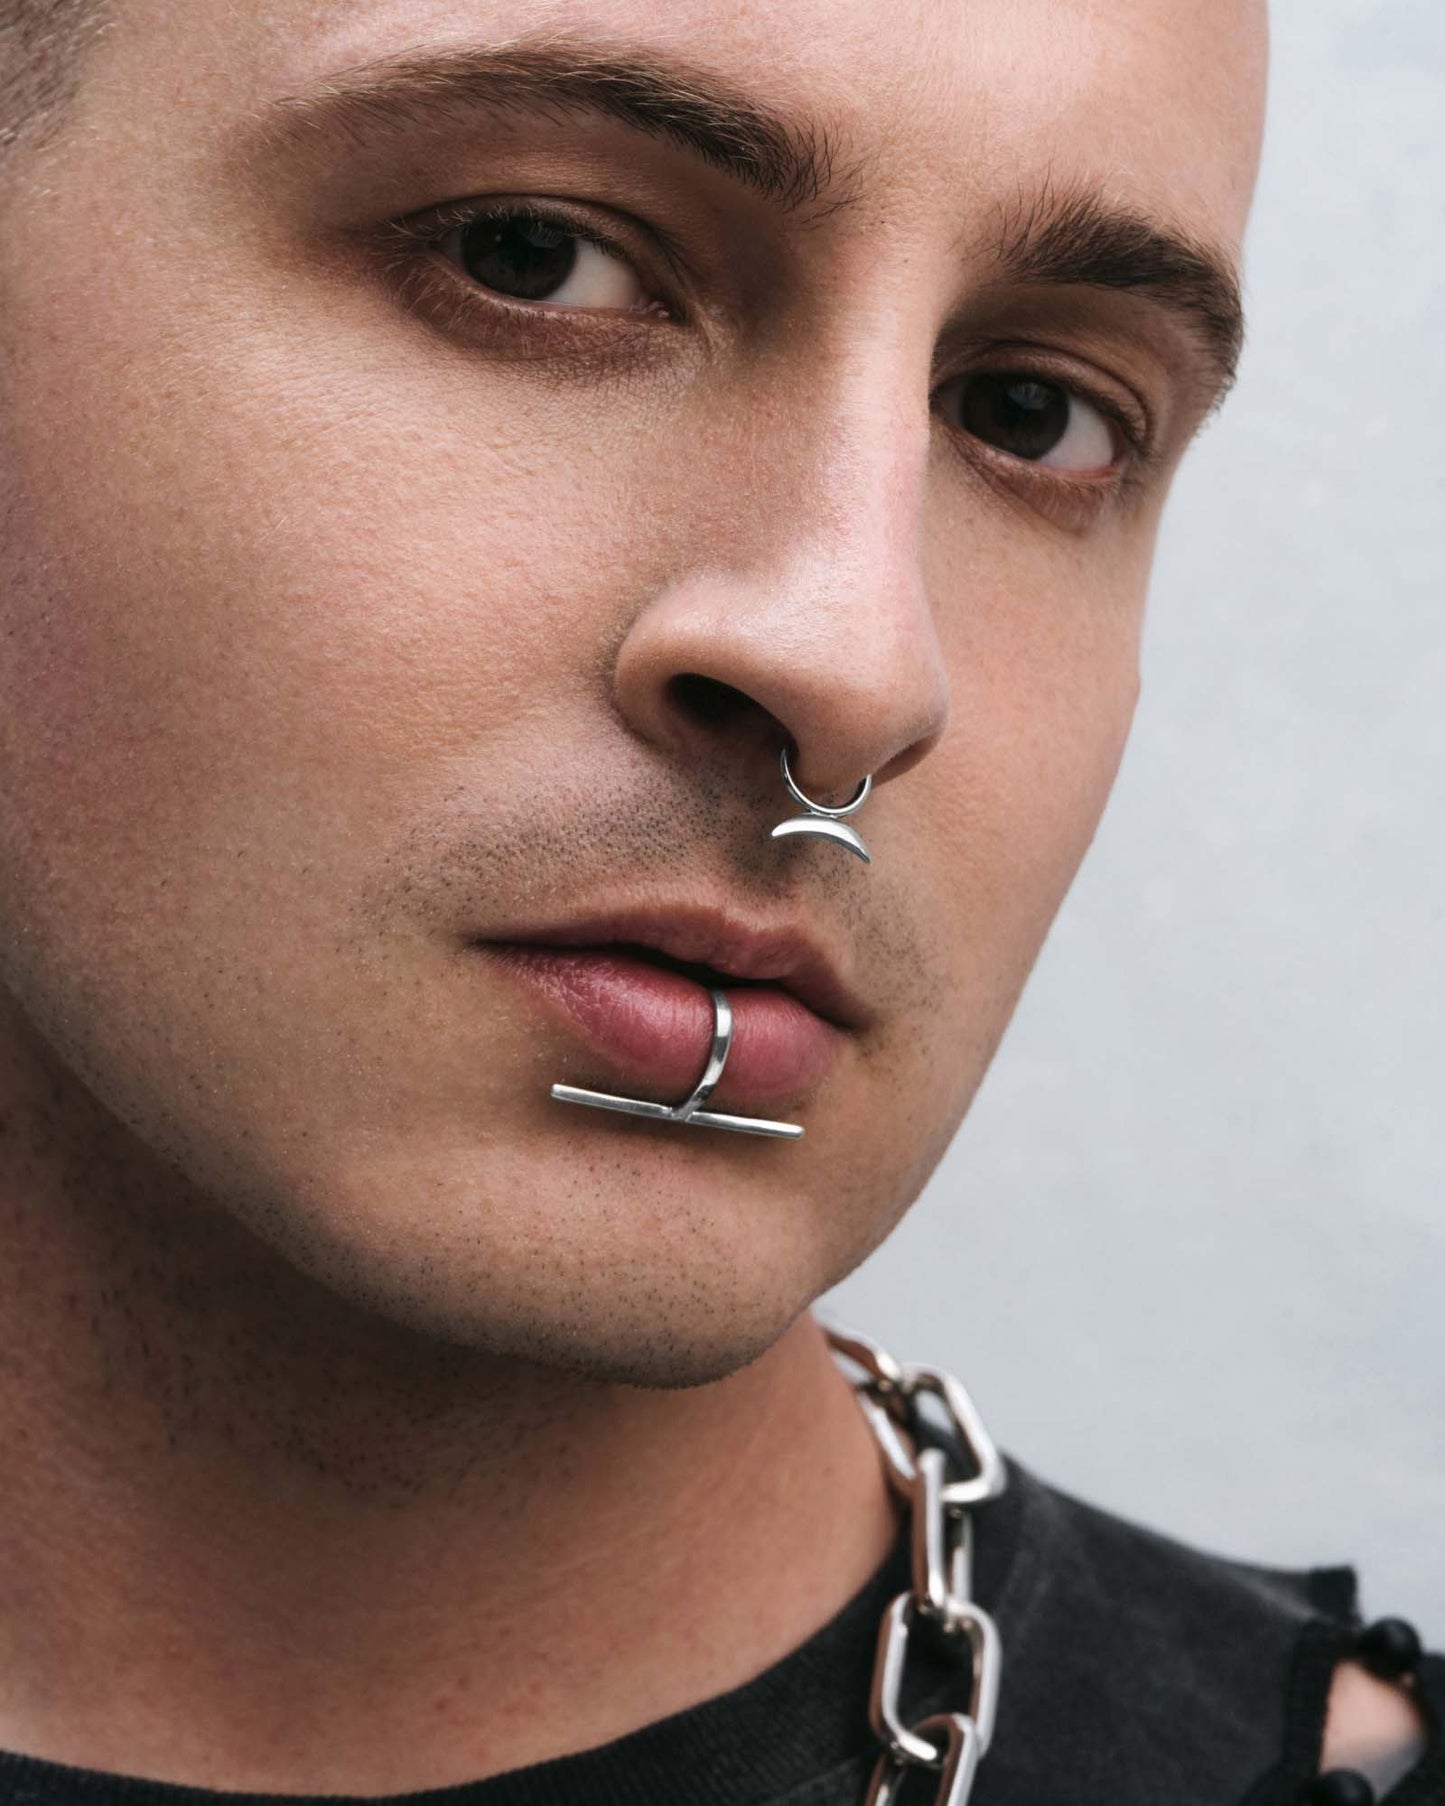 How to change your septum piercing